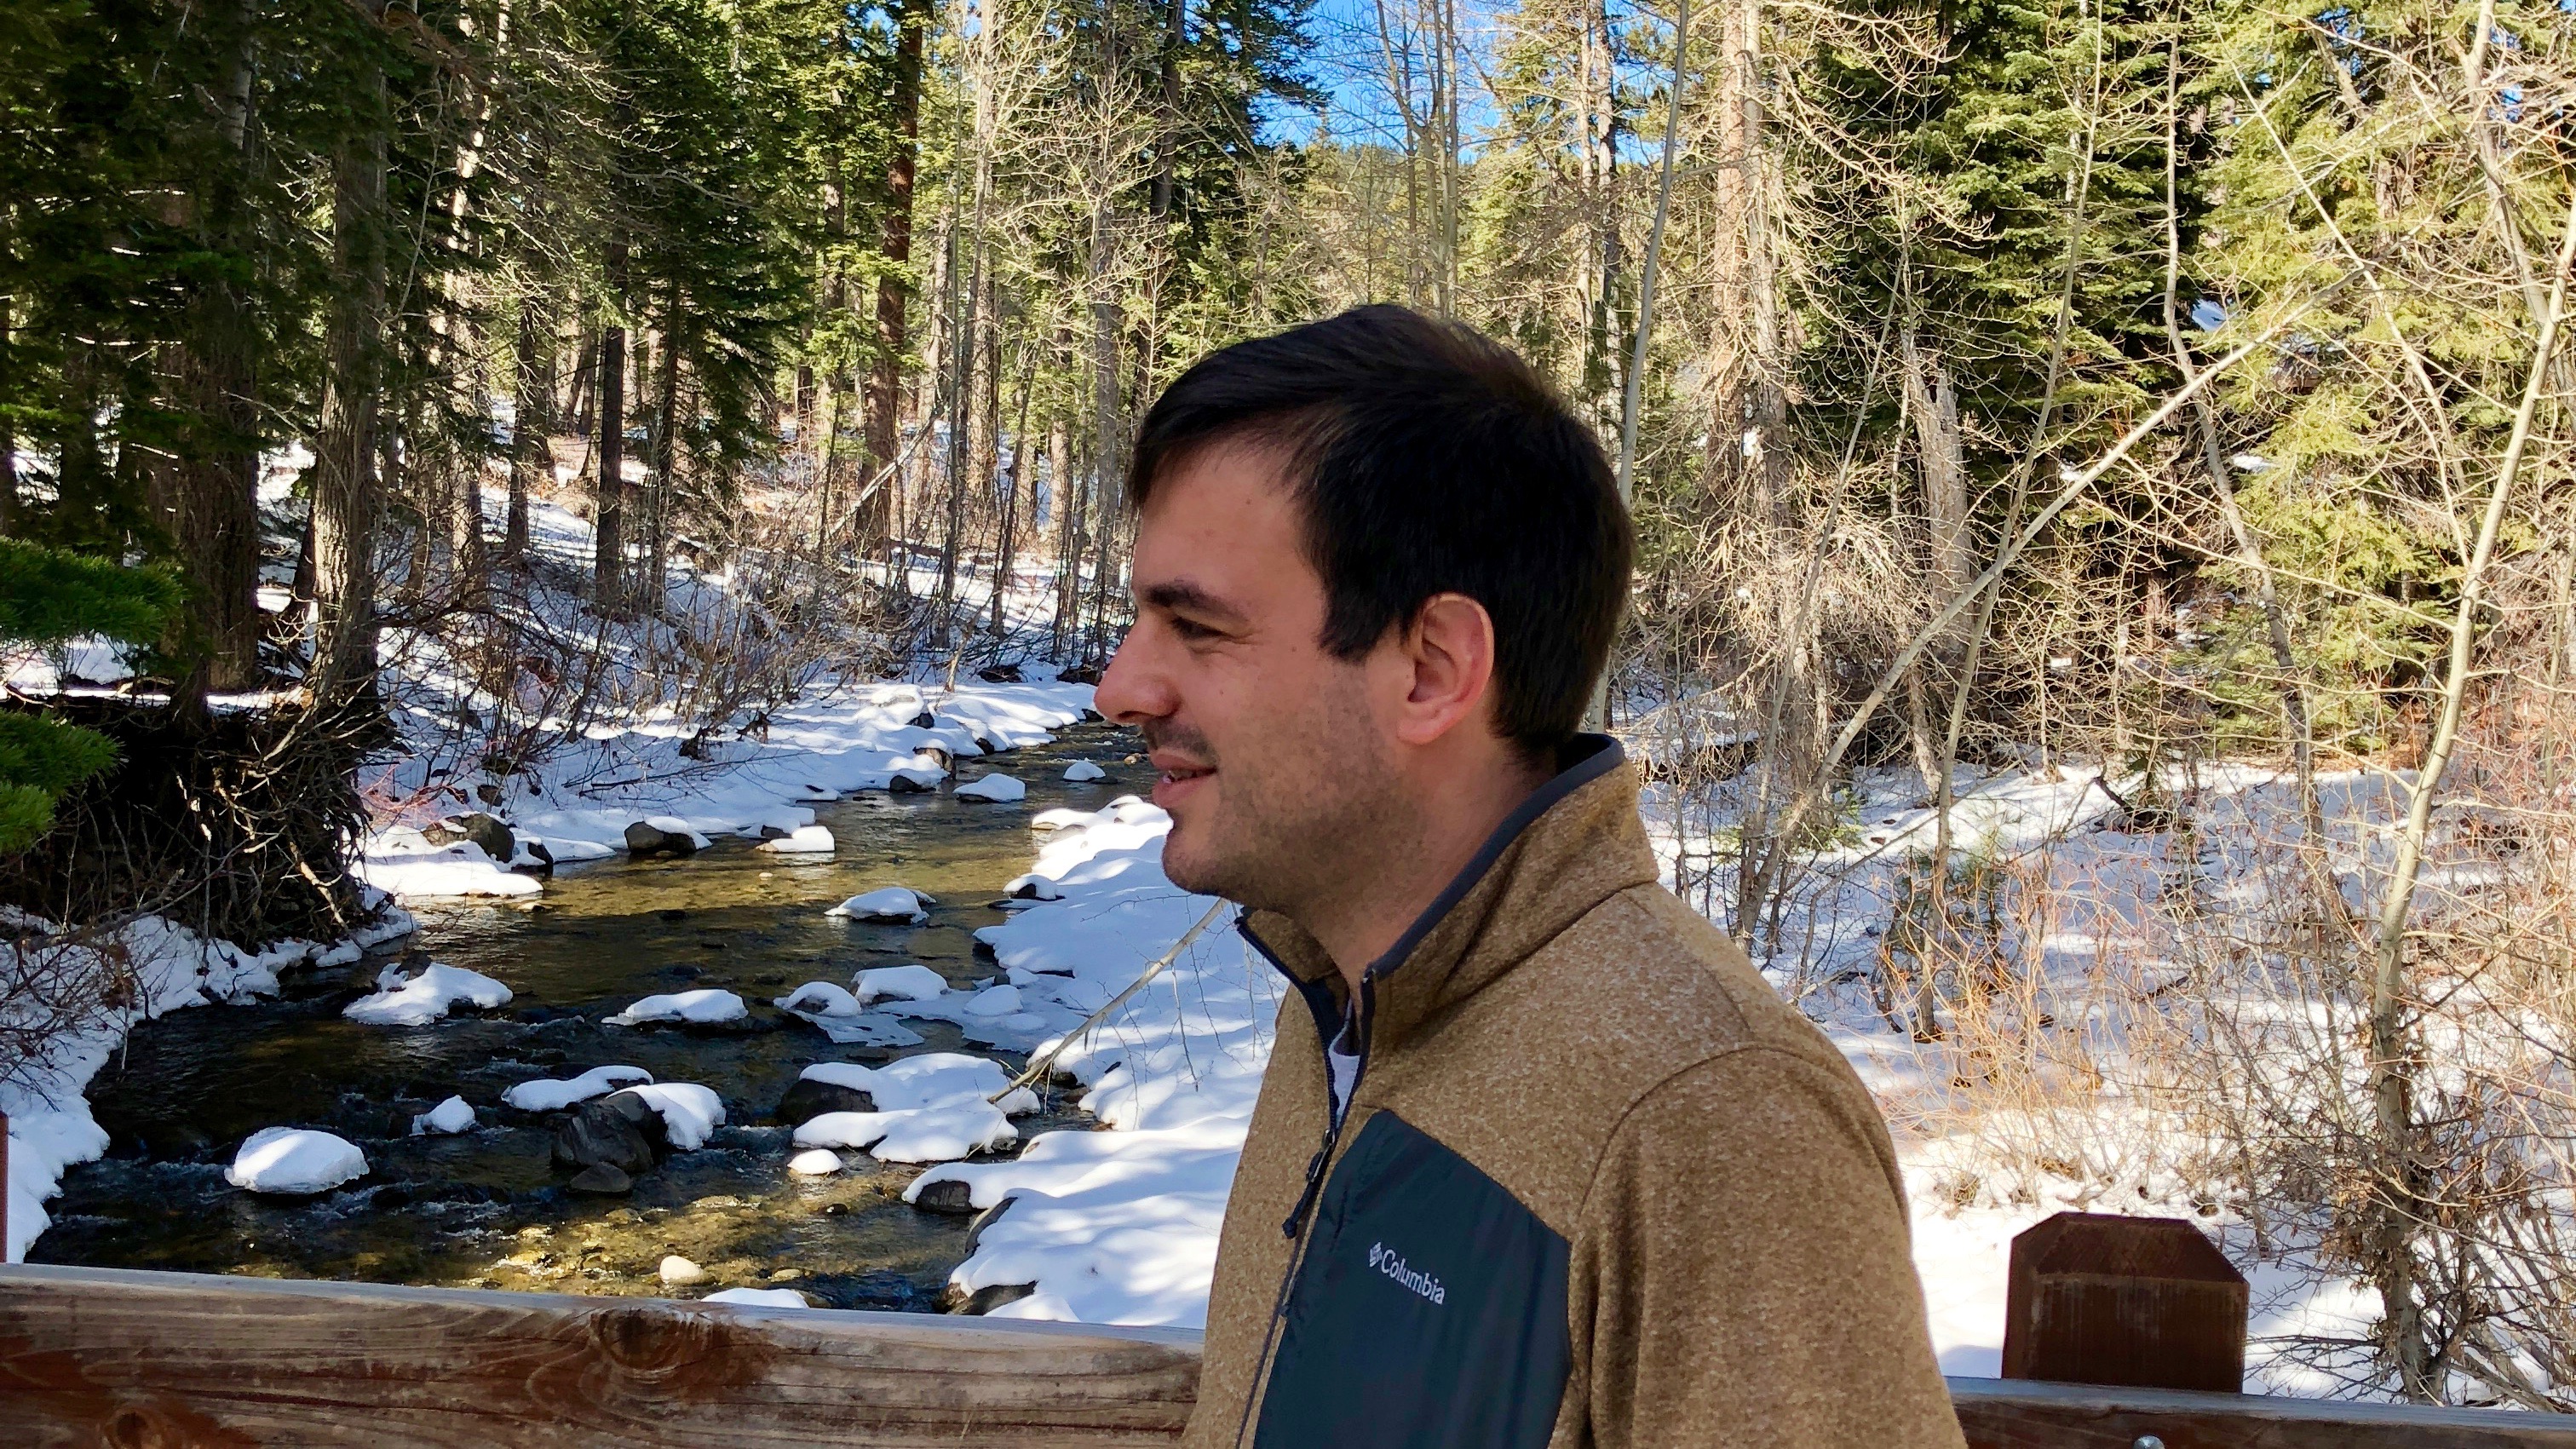 Fulbright Scholar Pedro Luis Borges Chaffe at one of the Lake Tahoe creeks.